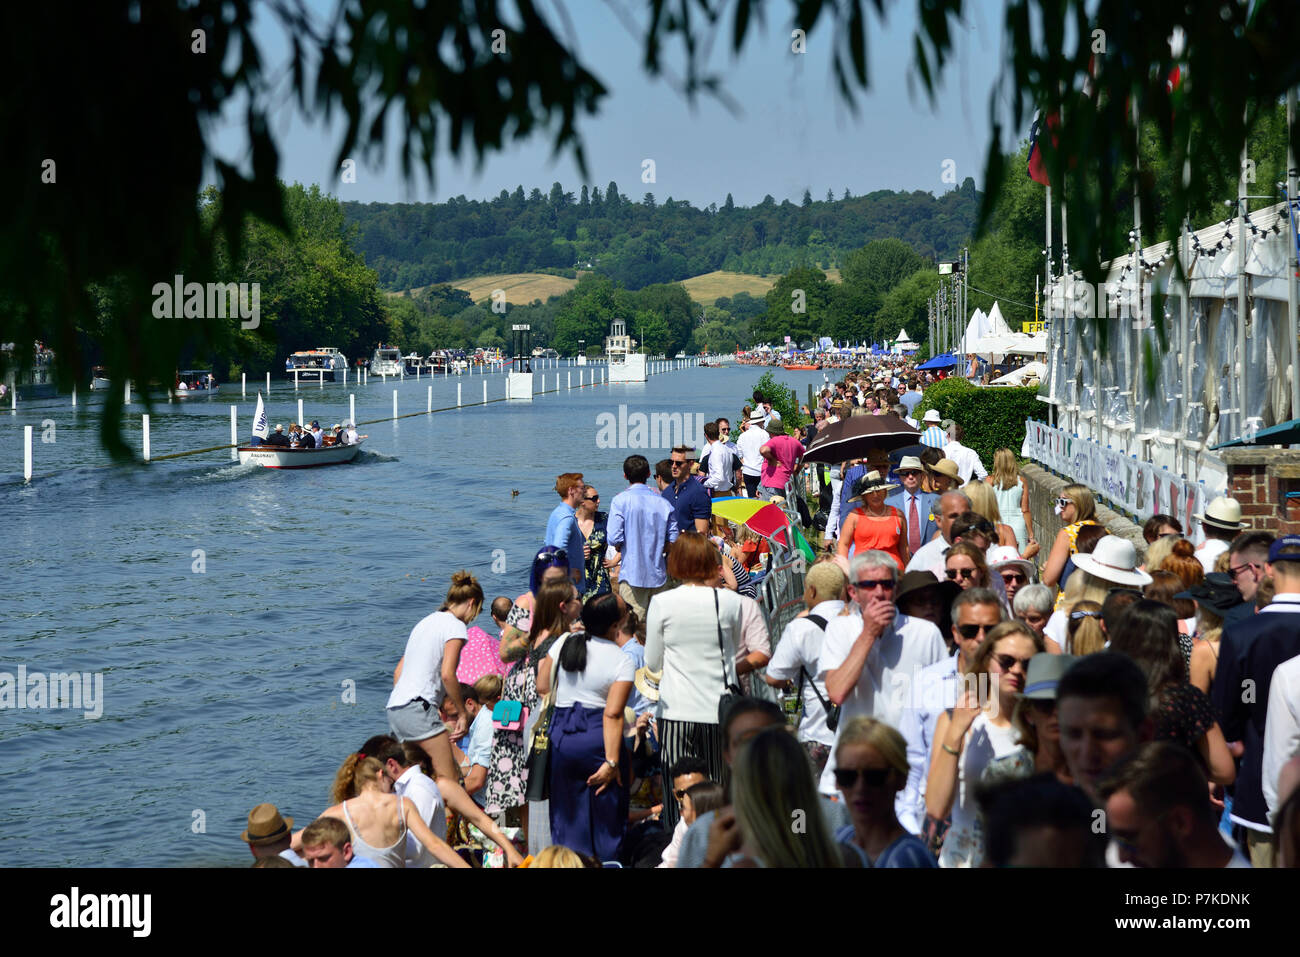 Henley Royal Regatta, Henley-On-Thames, UK. 6th July 2018. The third day of the Henley Royal Regatta took place on a stunning day in the Thames Valley.  The banks of the River Thames were packed with spectators enjoying one of the social events of the summer together with watching some of the worlds best rowers.Credit Wendy Johnson/Alamy Live News Stock Photo